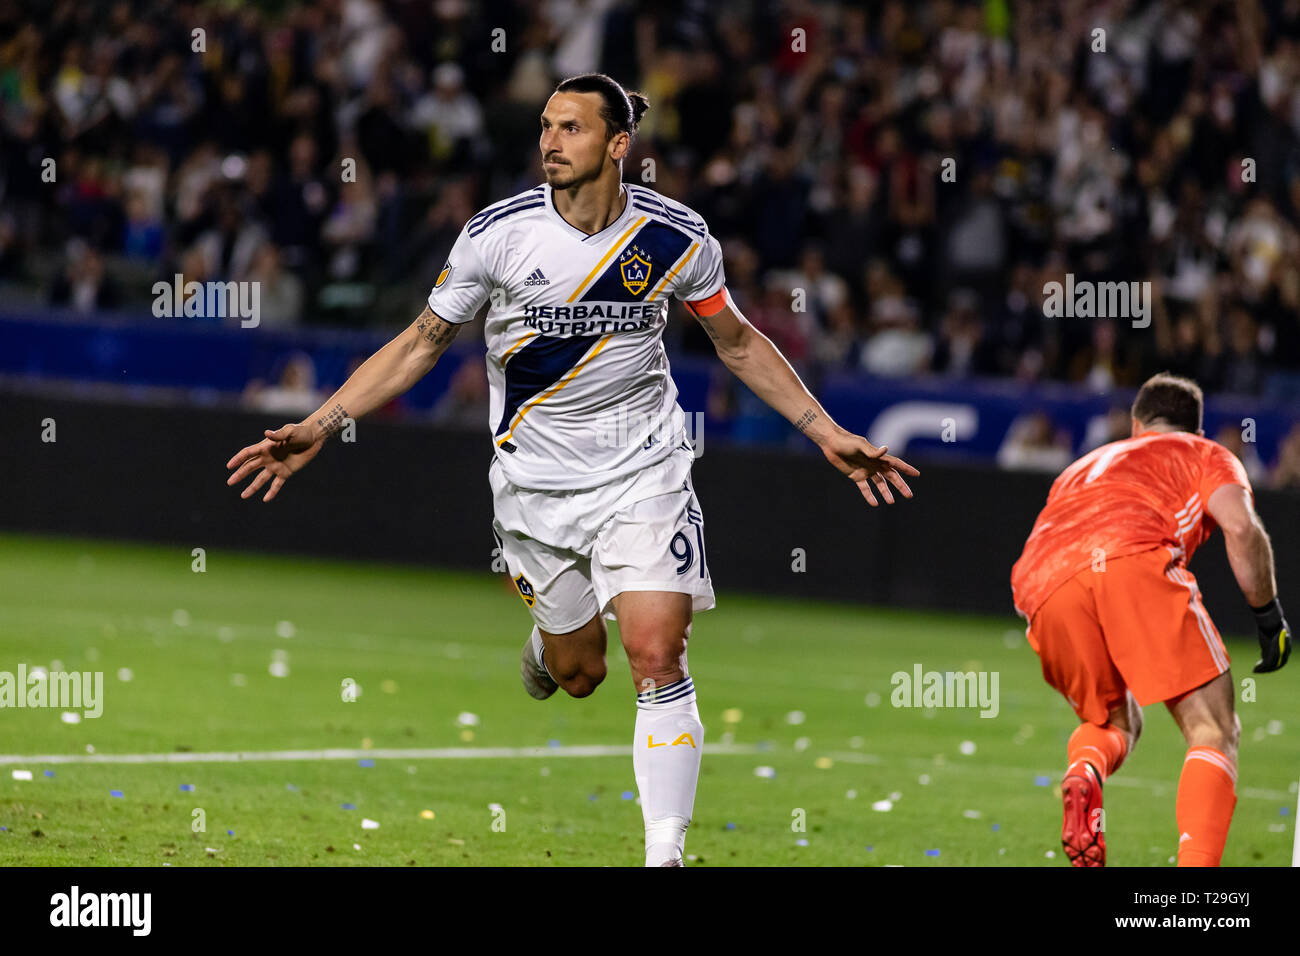 Los Angeles, USA. 31st March, 2019. Who else? Zlatan Ibrahimovic celebrates after slotting home his second penalty of the night to lead the Galaxy 2-1 past the Portland Timbers. Credit: Ben Nichols/Alamy Live News Stock Photo